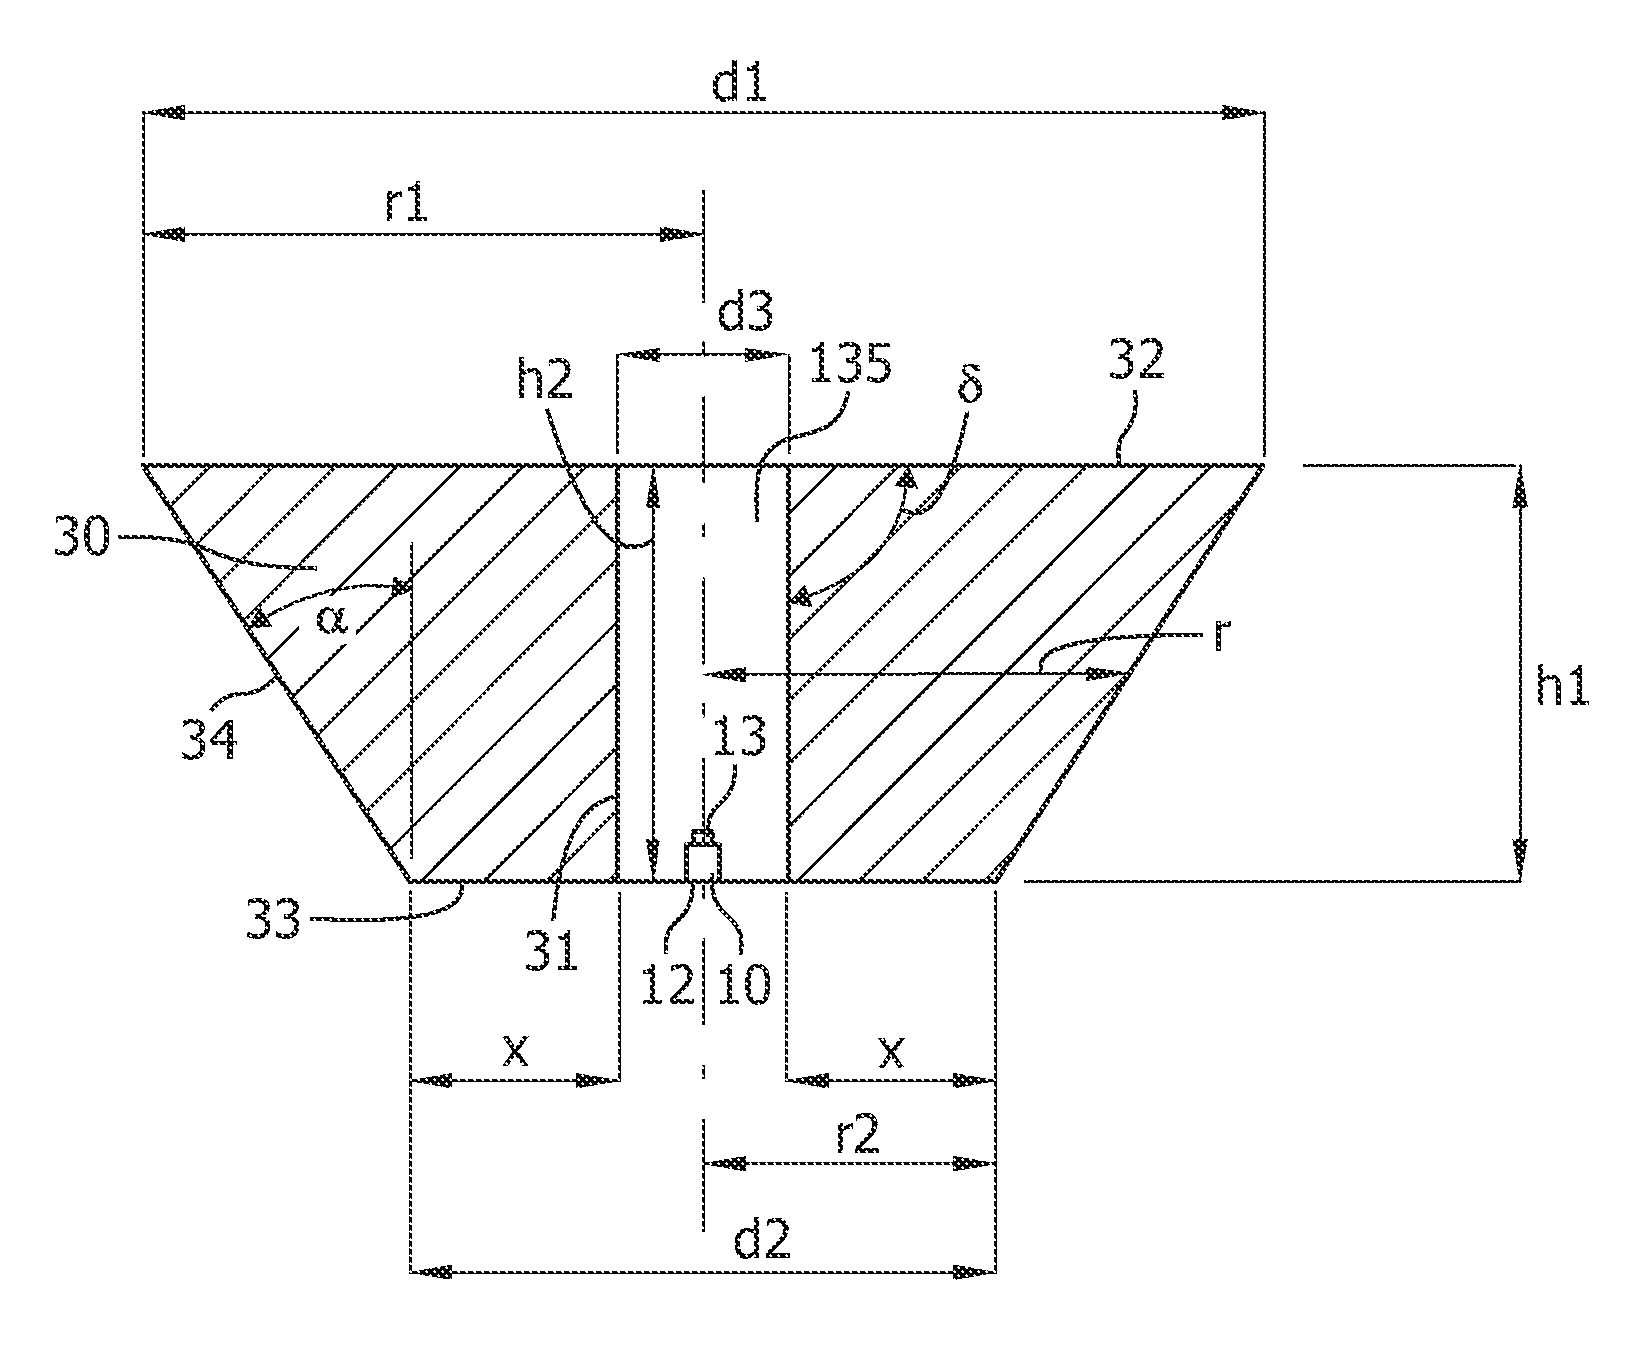 Lighting device comprising at least one LED